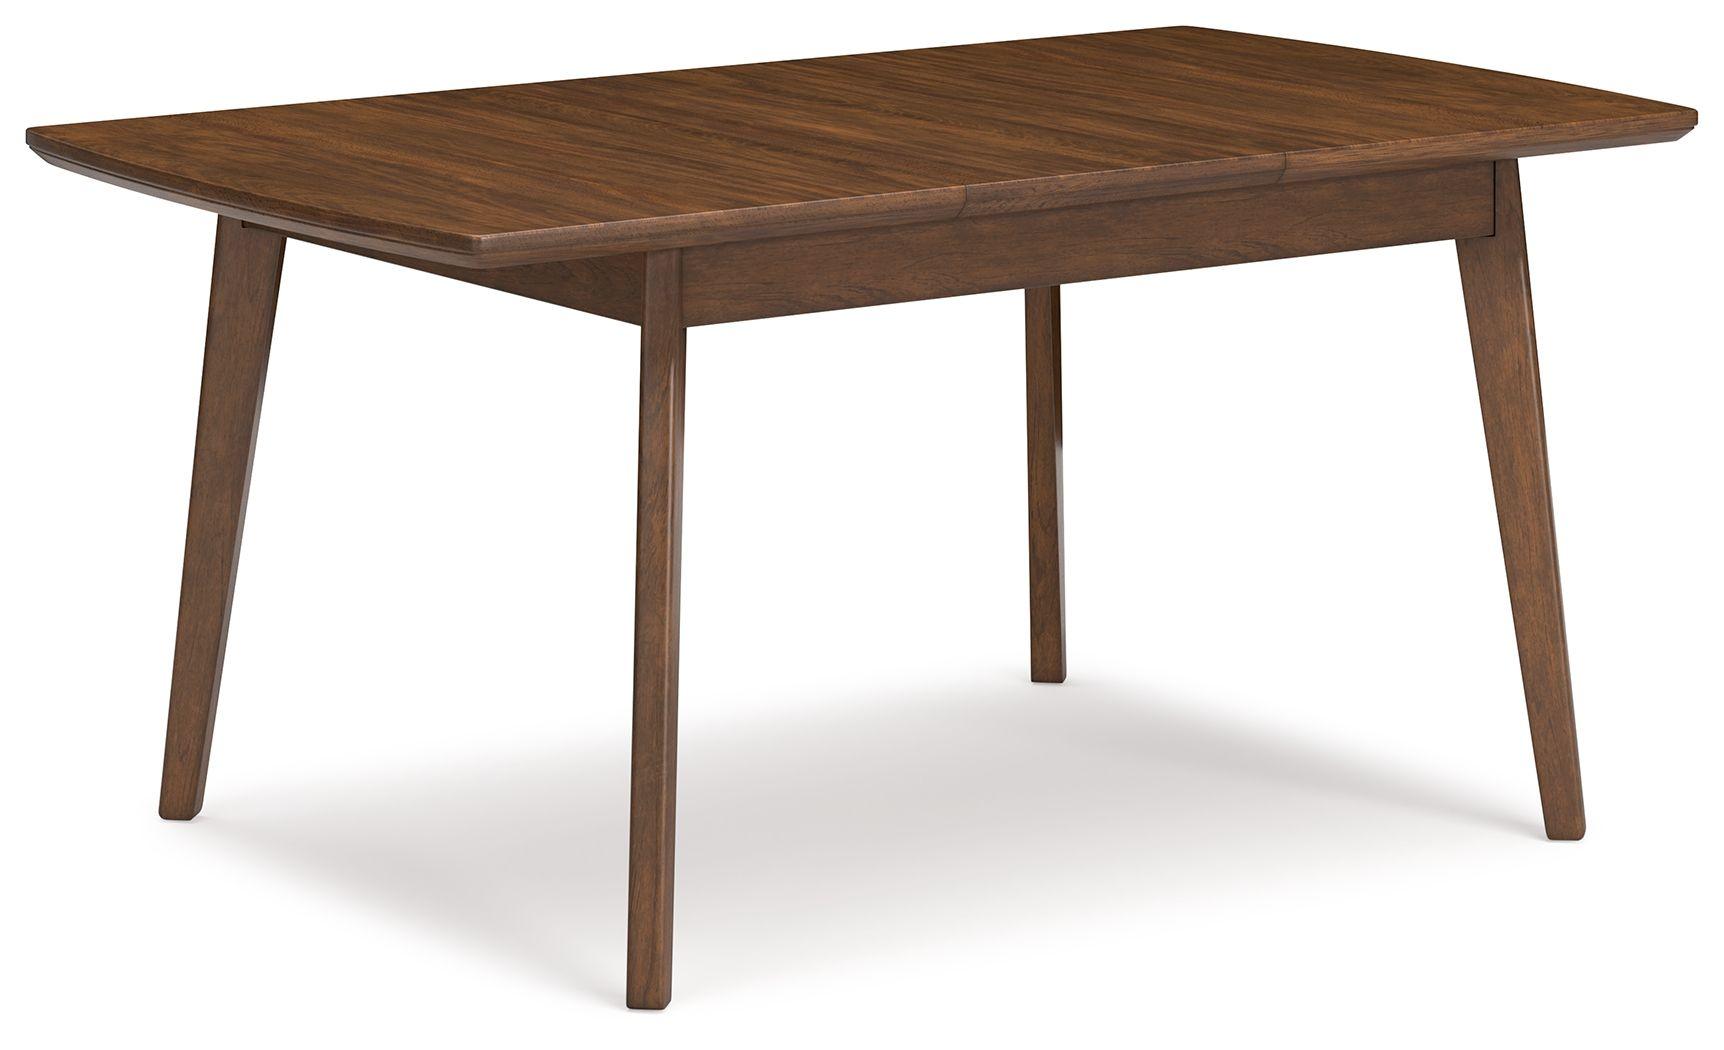 Signature Design by Ashley® - Lyncott - Brown - Rectangular Dining Room Butterfly Extension Table - 5th Avenue Furniture